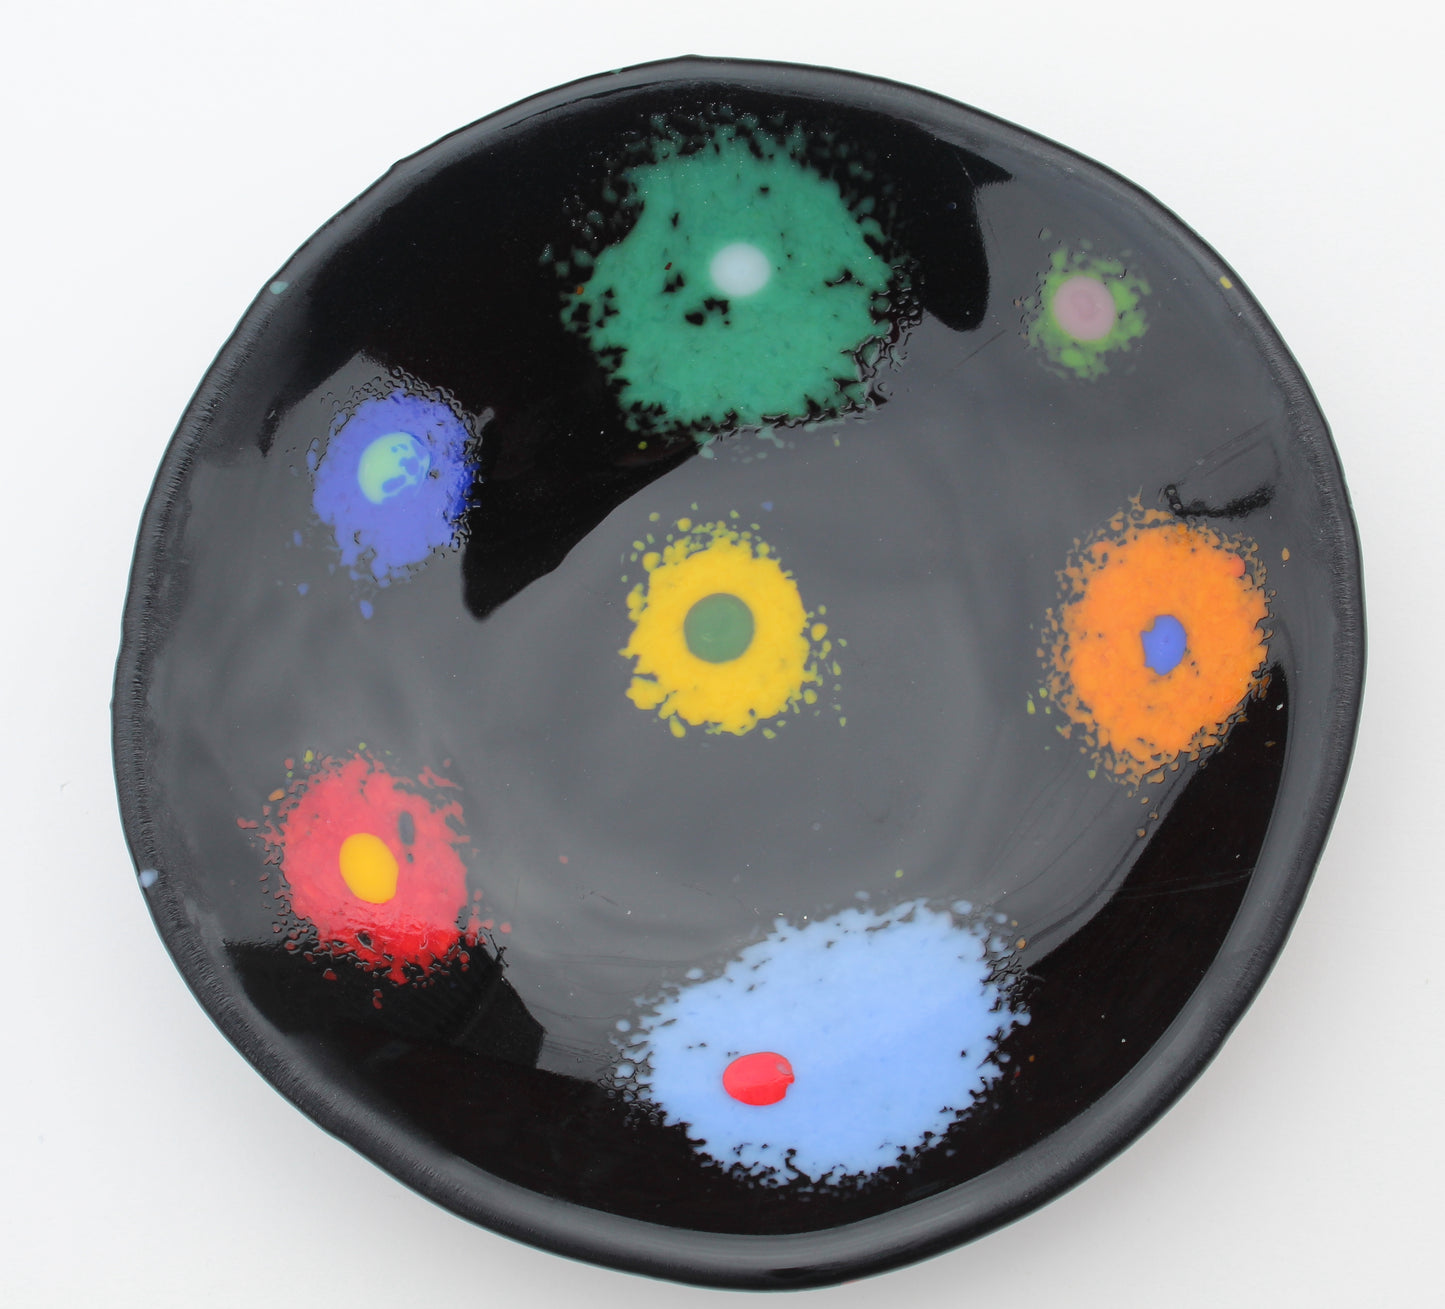 This is a black fused glass piece with green, orange, red, yellow and blue spattered dots with a multicolored dt in the center